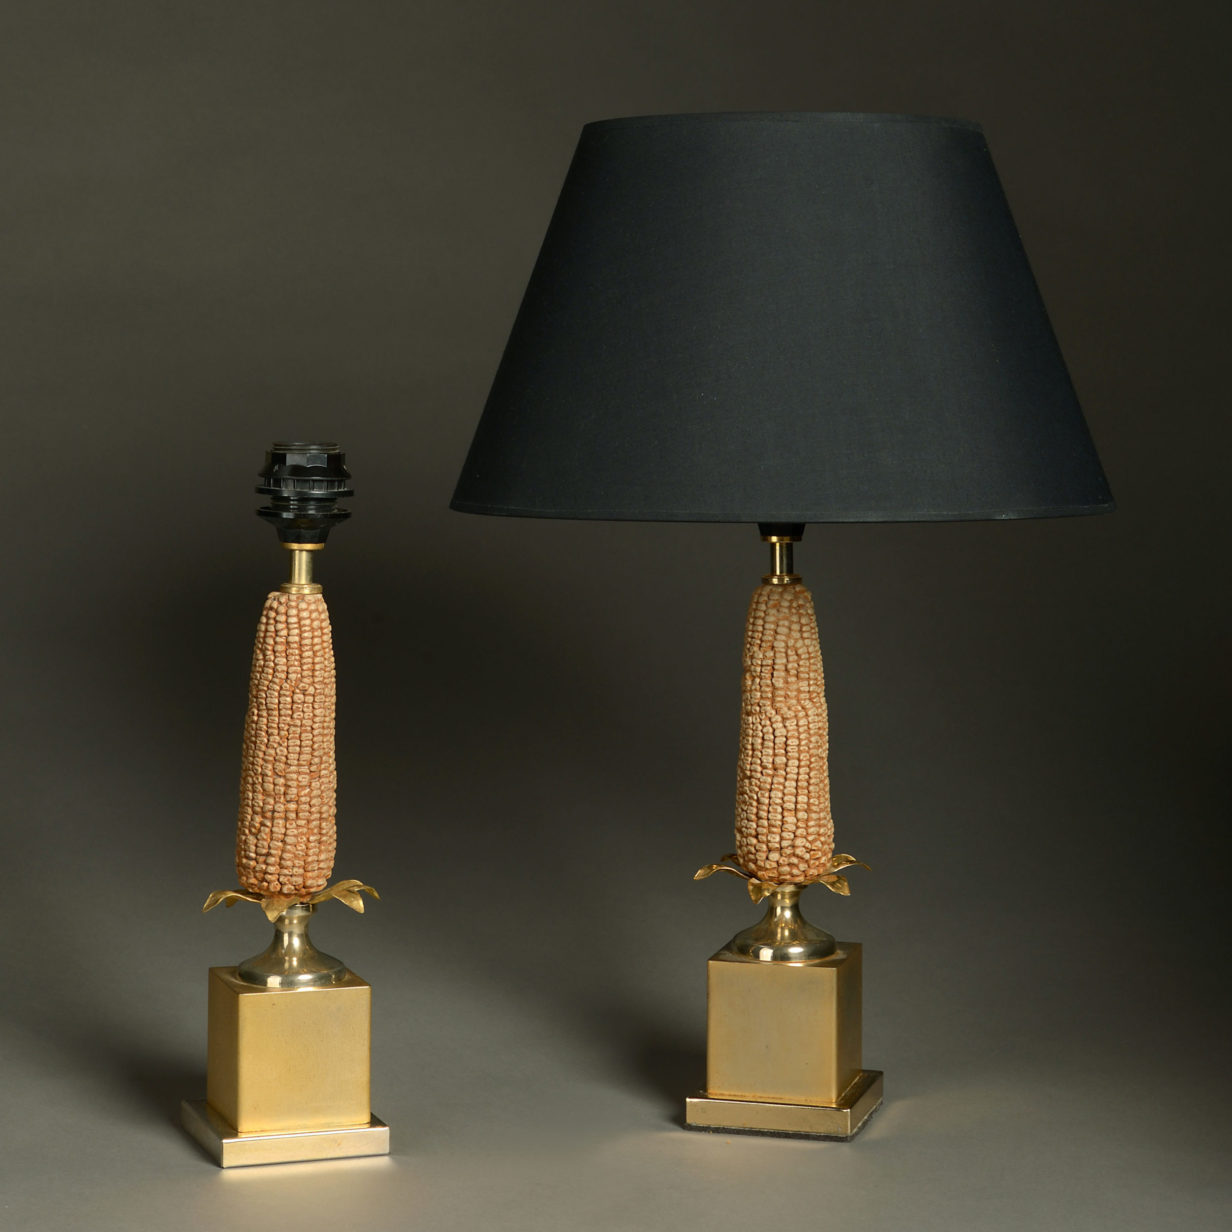 A pair of mid-century lamps - manner of maison charles